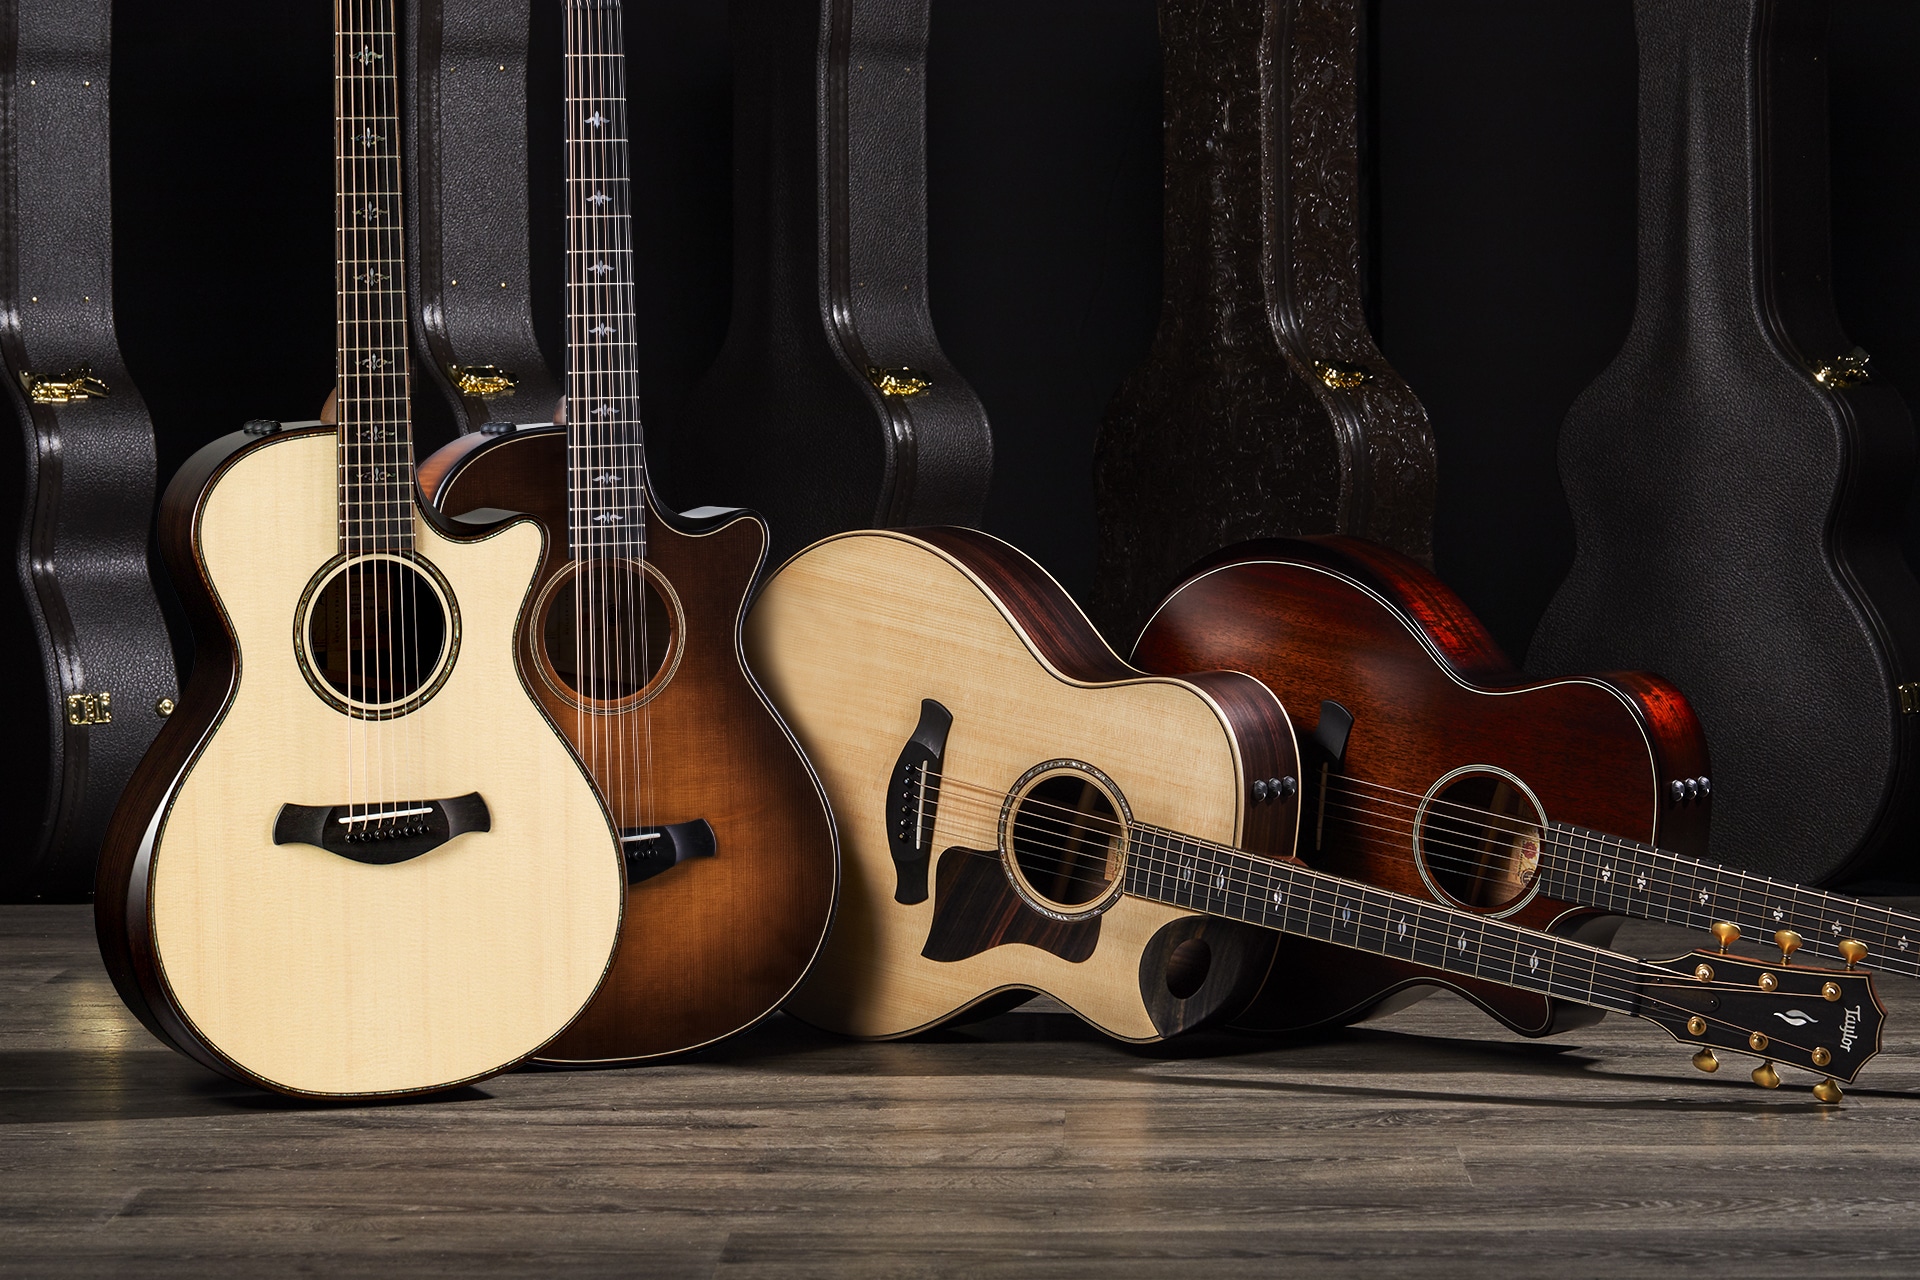 NAMM 2020 Gear Roundup: Guitars, Amps, Recording, Microphones and More